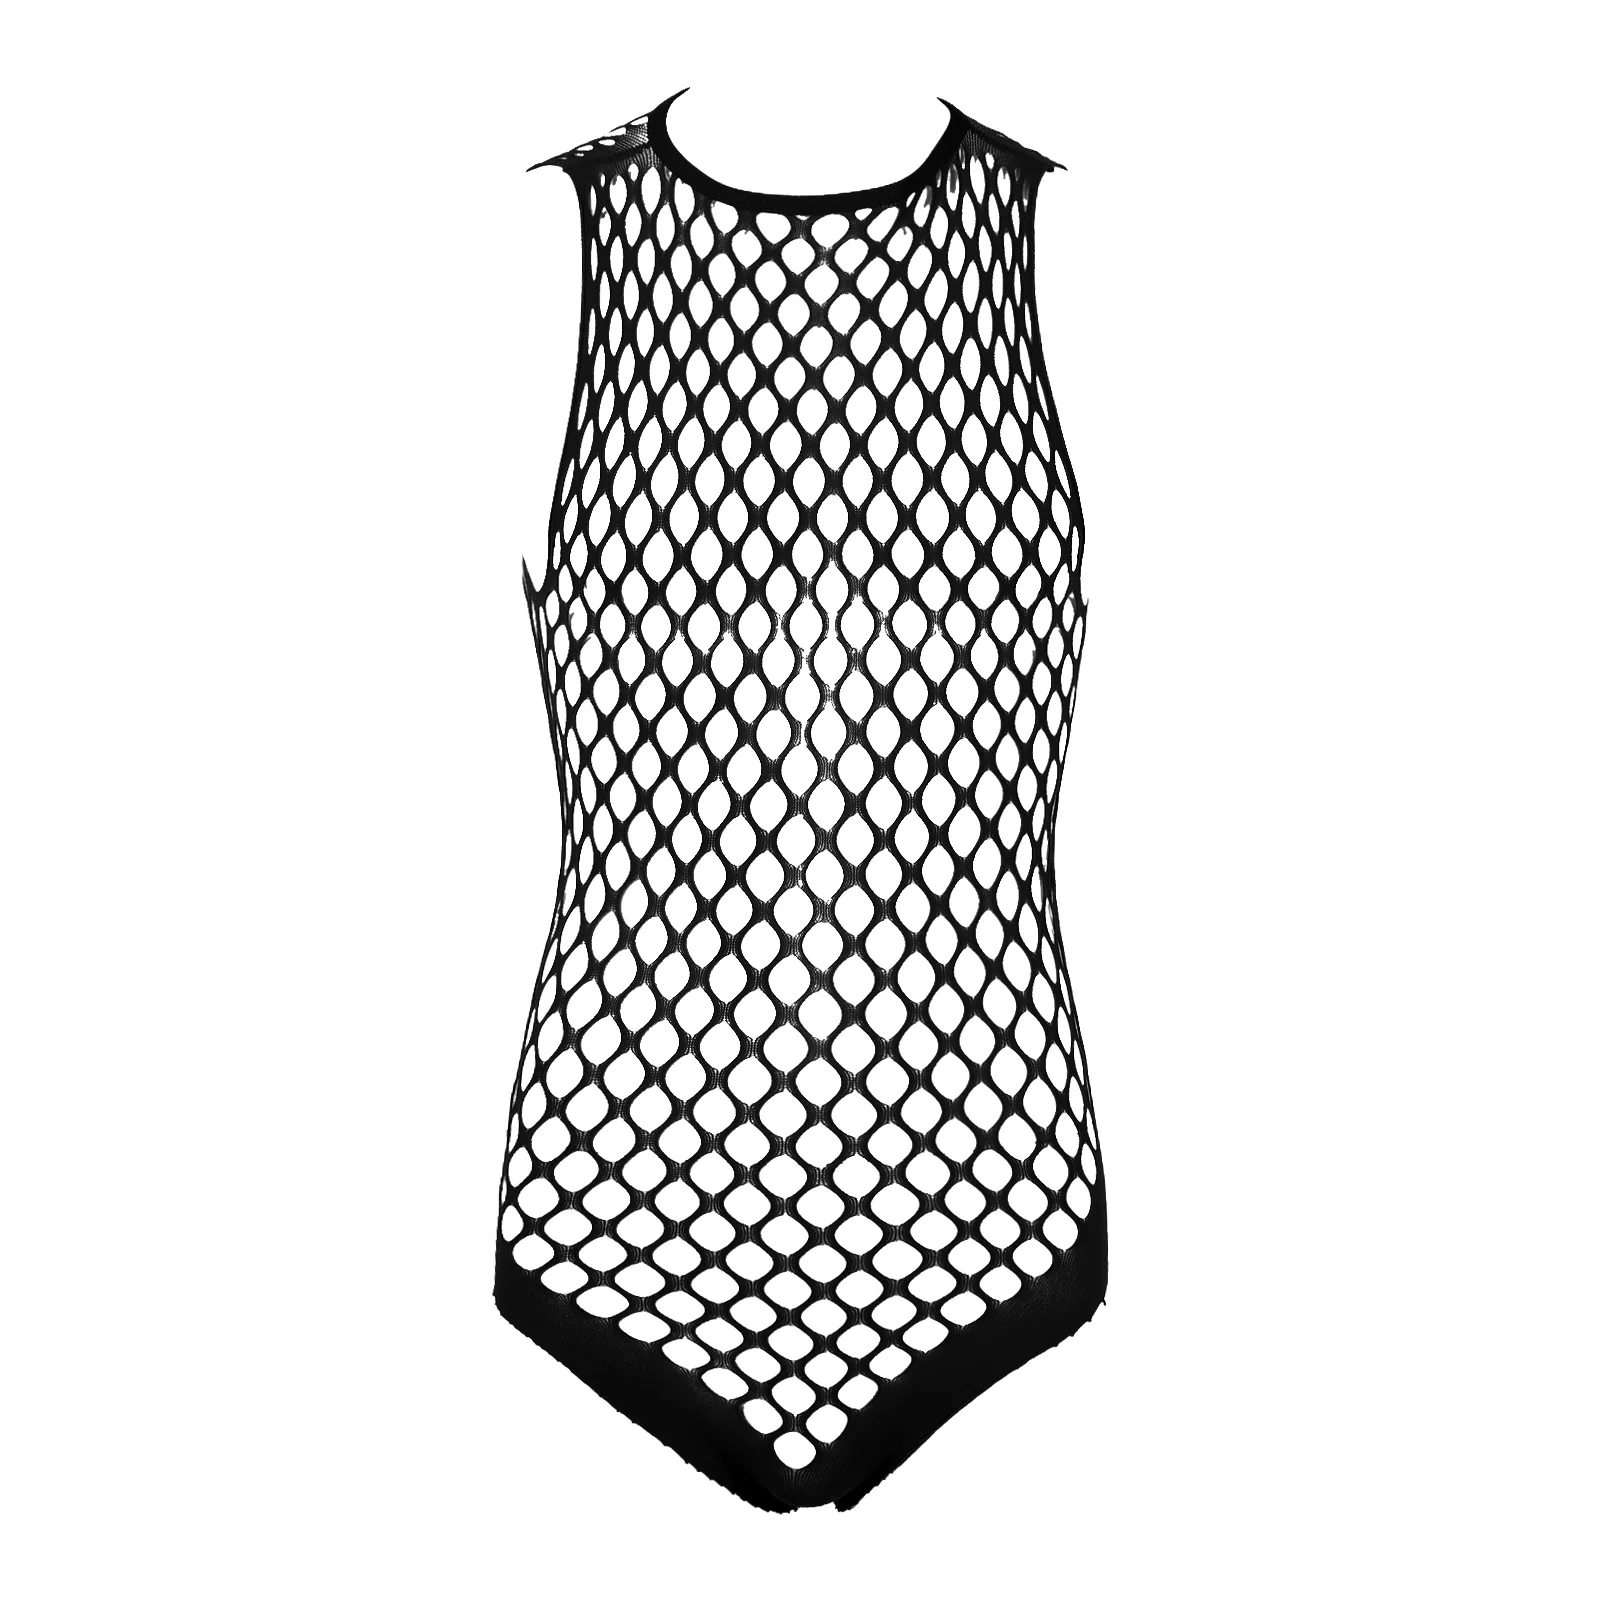 

Men One-piece Hollow Out Fishnet Netted Bodystockings Lingerie Halter Neck Sleeveless See-through Stretchy Bodysuits Nightwear